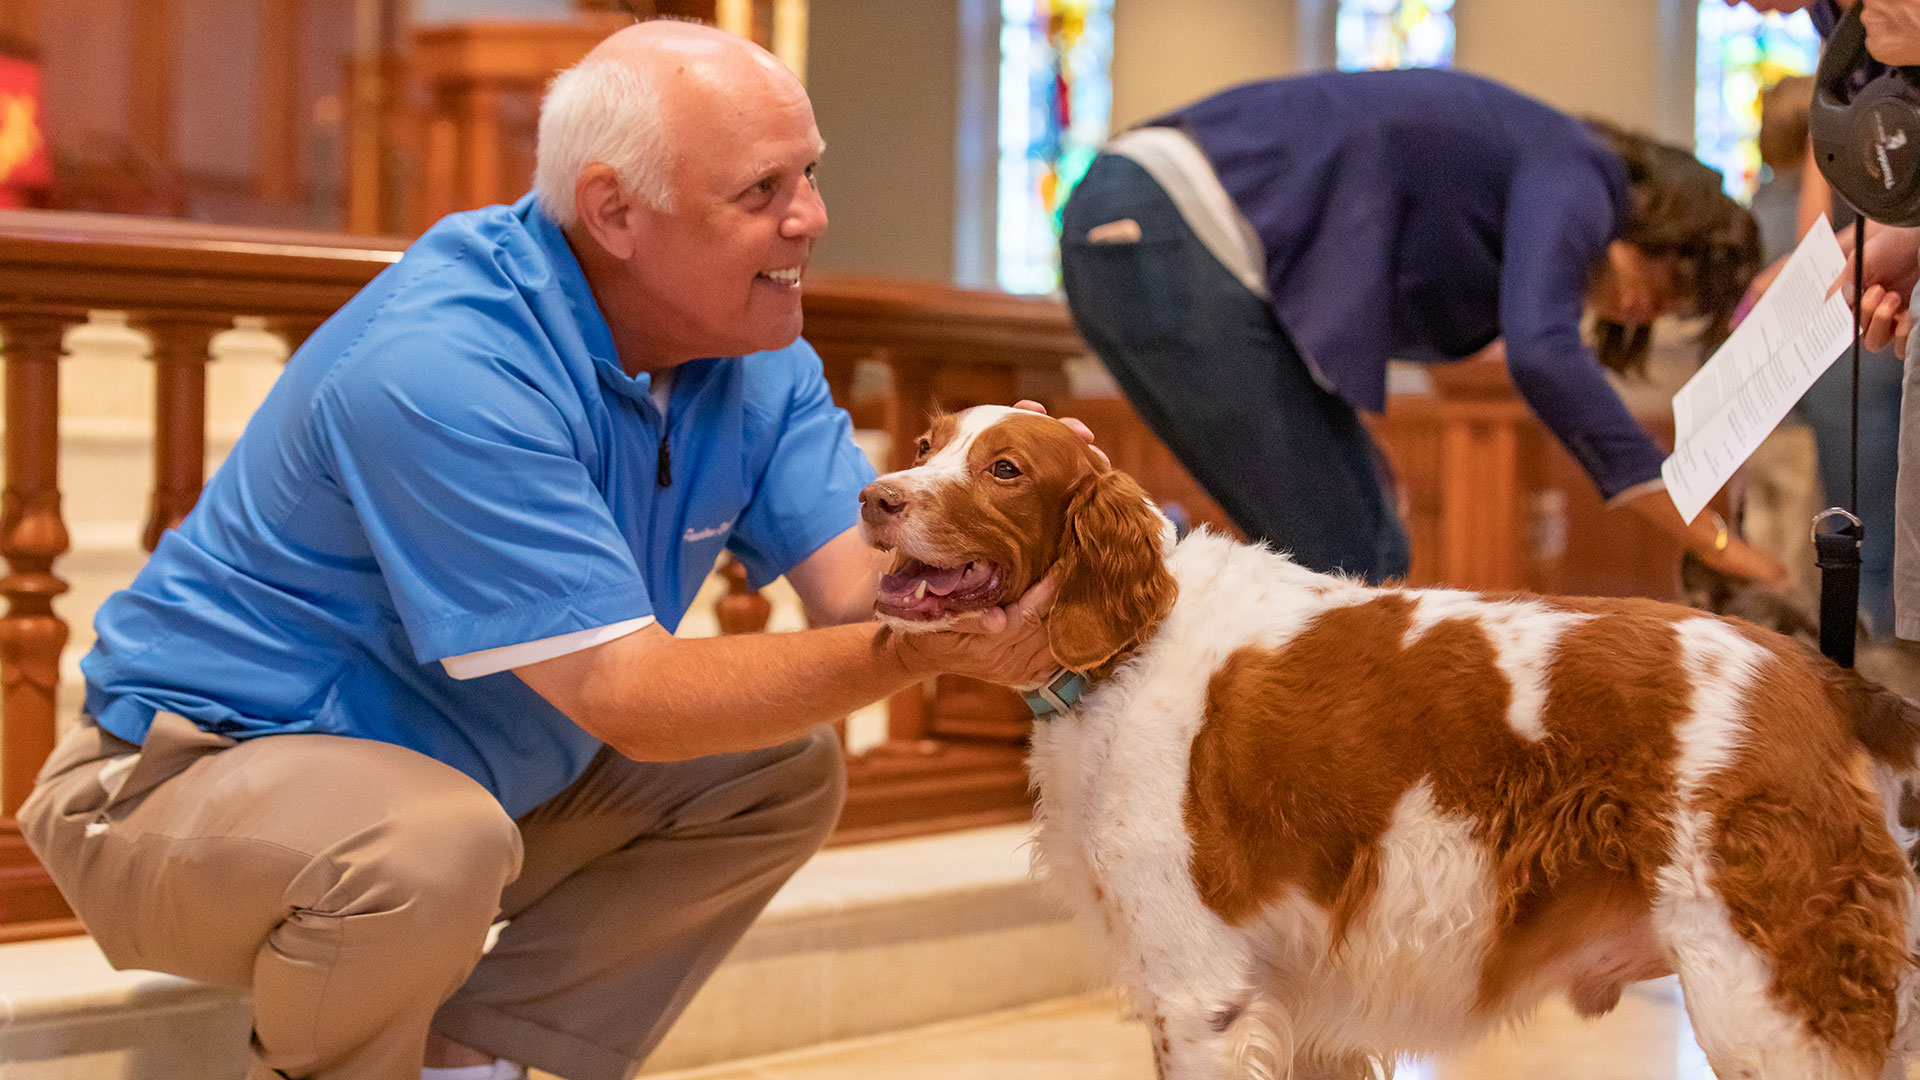 The Blessing of the Animals at Peachtree Road United Methodist Church in Atlanta, Georgia.